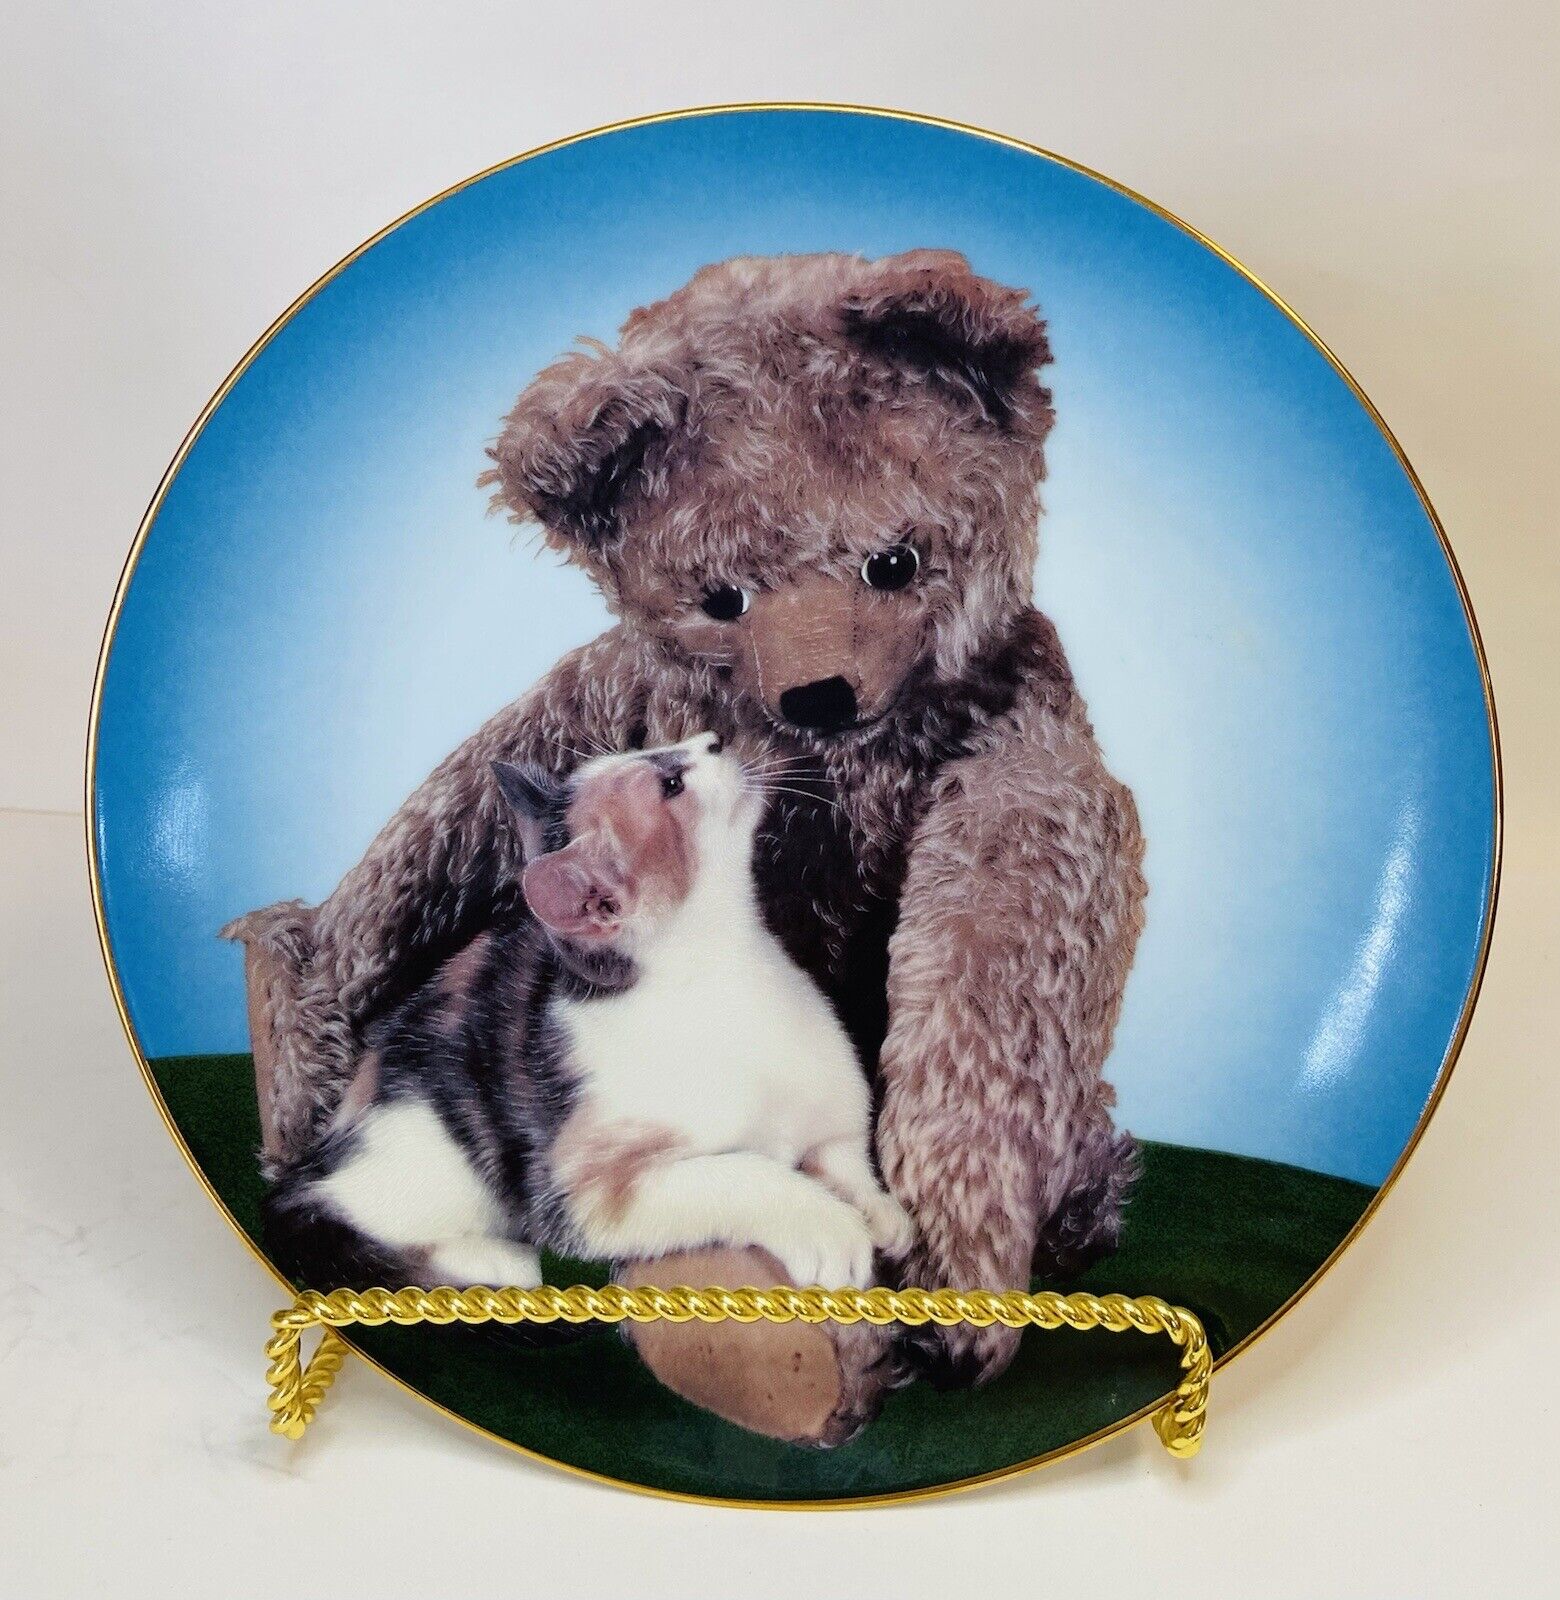 Armstrong’s Art On Porcelain REBECCA AND FRIEND Teddy Bear Collectors Plate